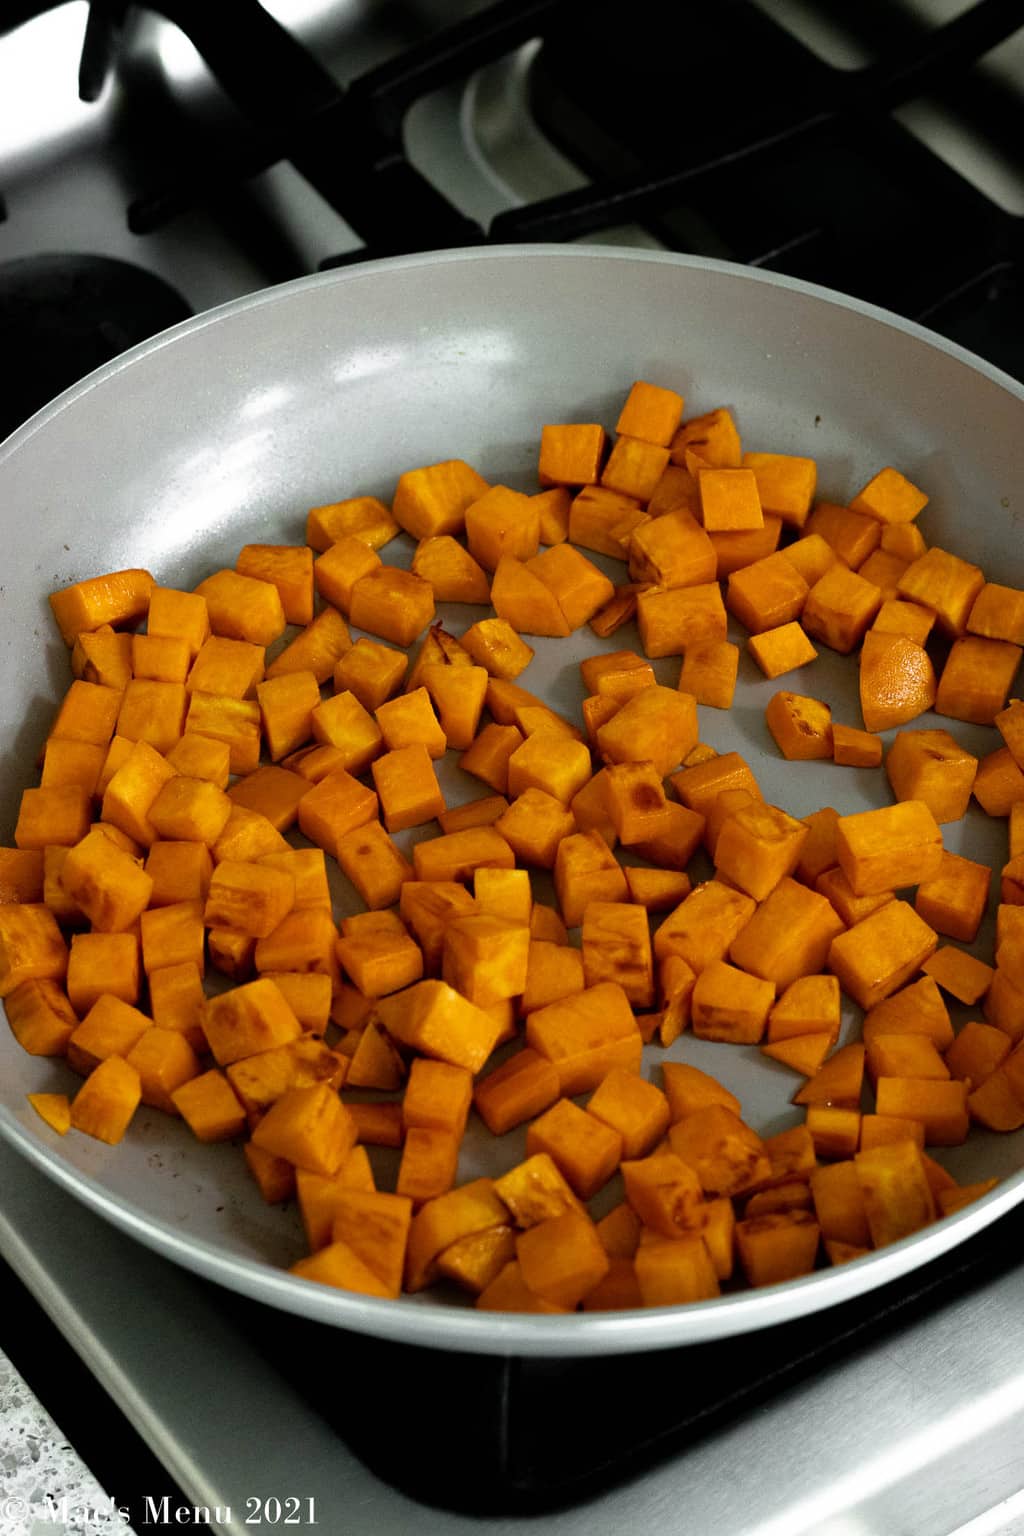 A side shot of a pan of cubed sweet potatoes.